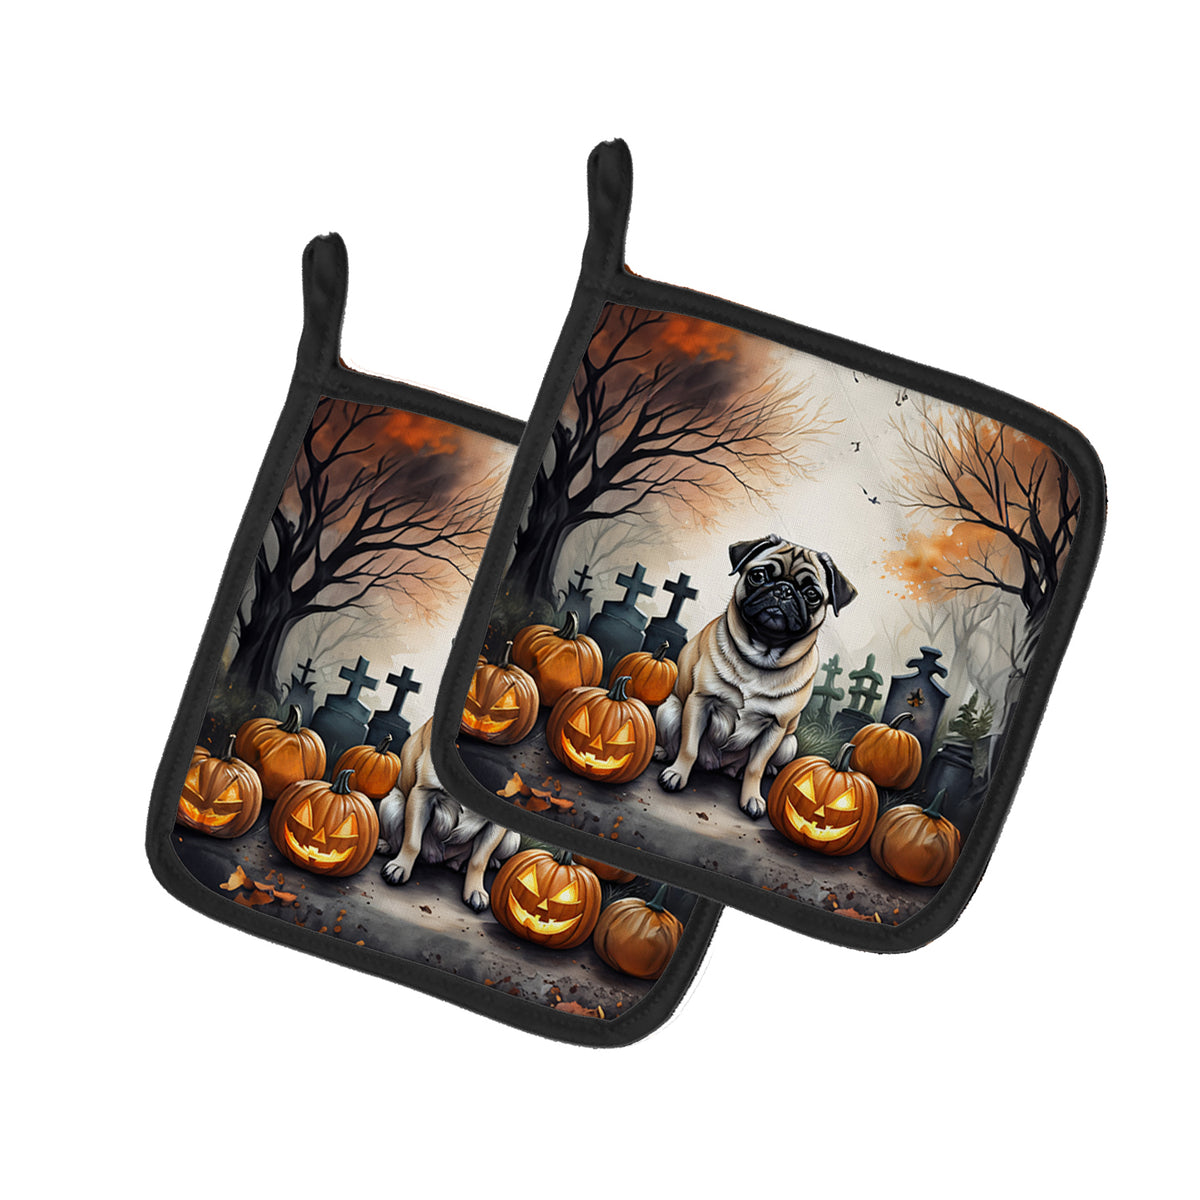 Buy this Fawn Pug Spooky Halloween Pair of Pot Holders